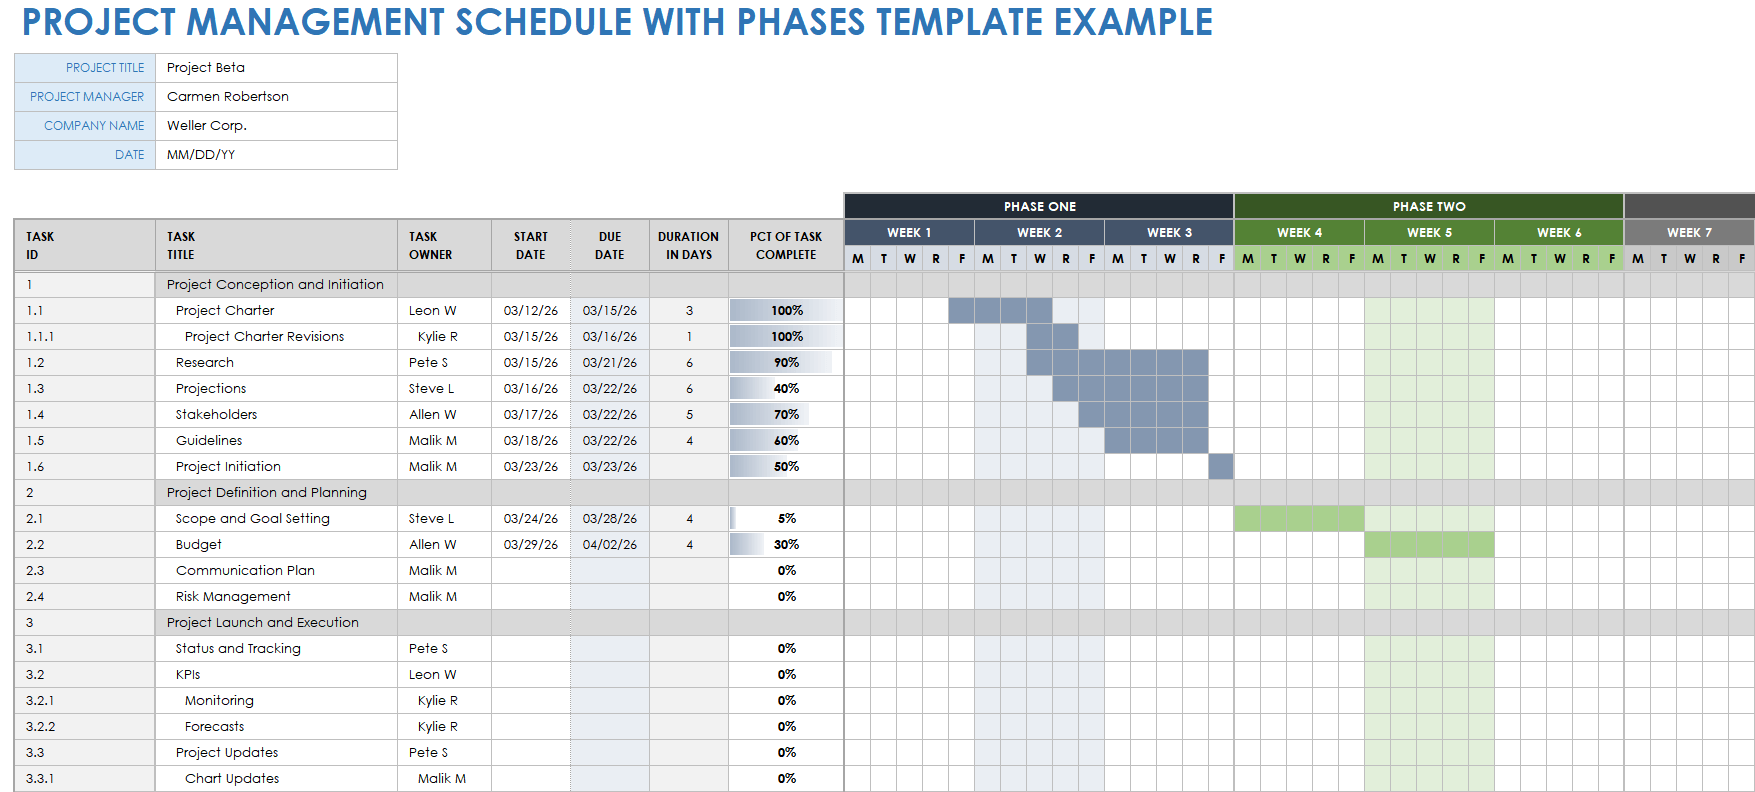 Example Project Management Schedule with Phases Template